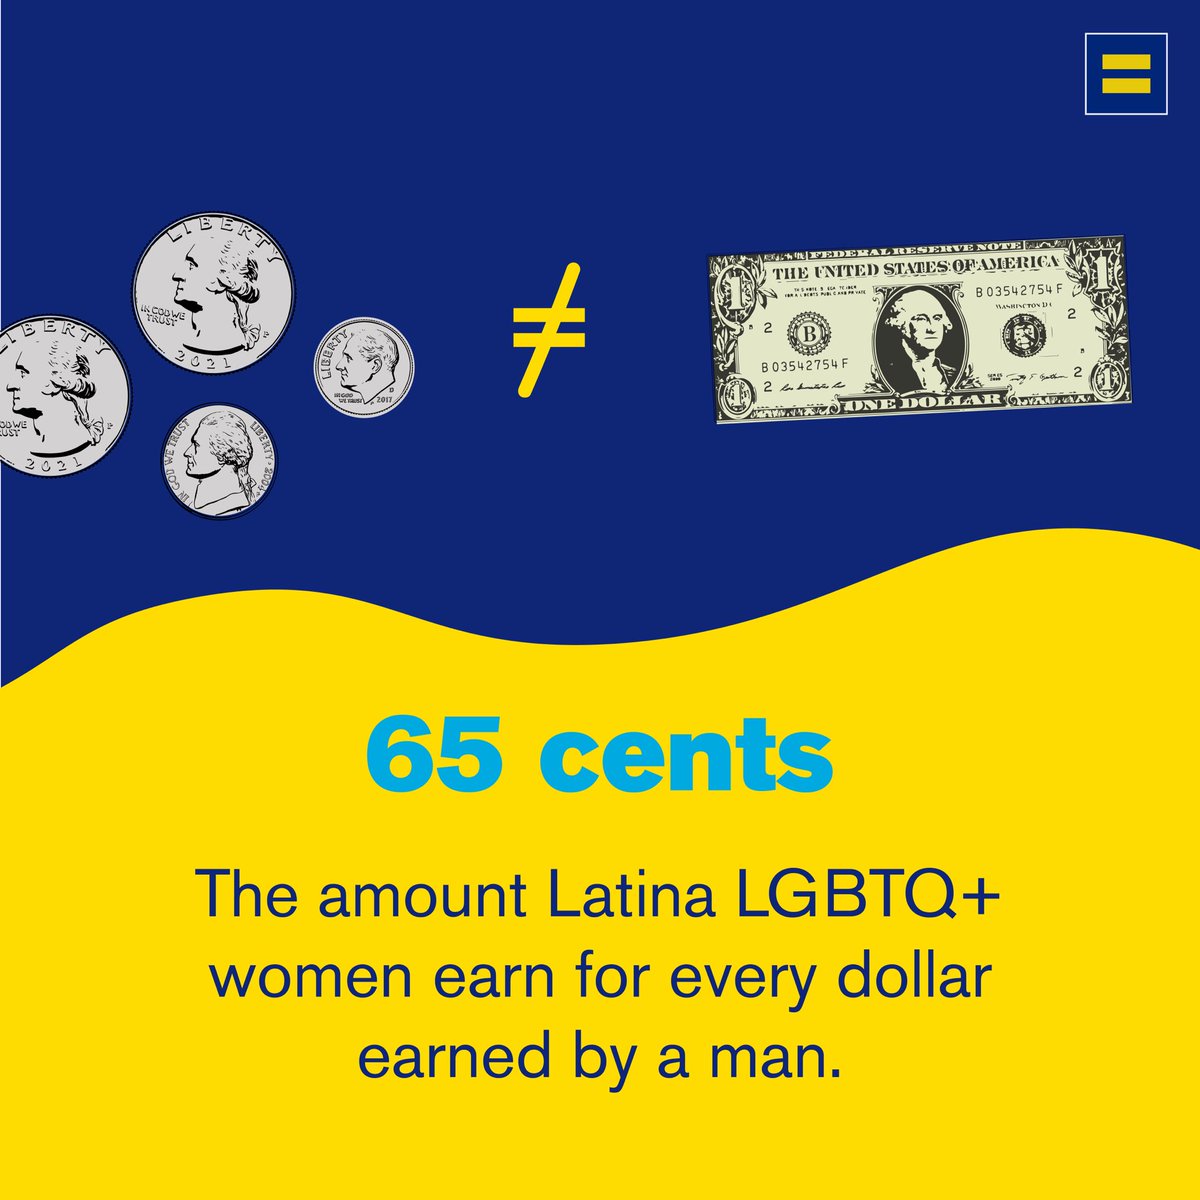 We also found that LGBTQ+ women in the U.S. working full-time earn about .79 for every $1 that the average man earns. The gap gets even greater for BIPOC & bisexual women, and those at the intersection of the two: hrc.im/WomensWageGap #LGBTQIAEqualPay #PrideInYourPay [🧵]